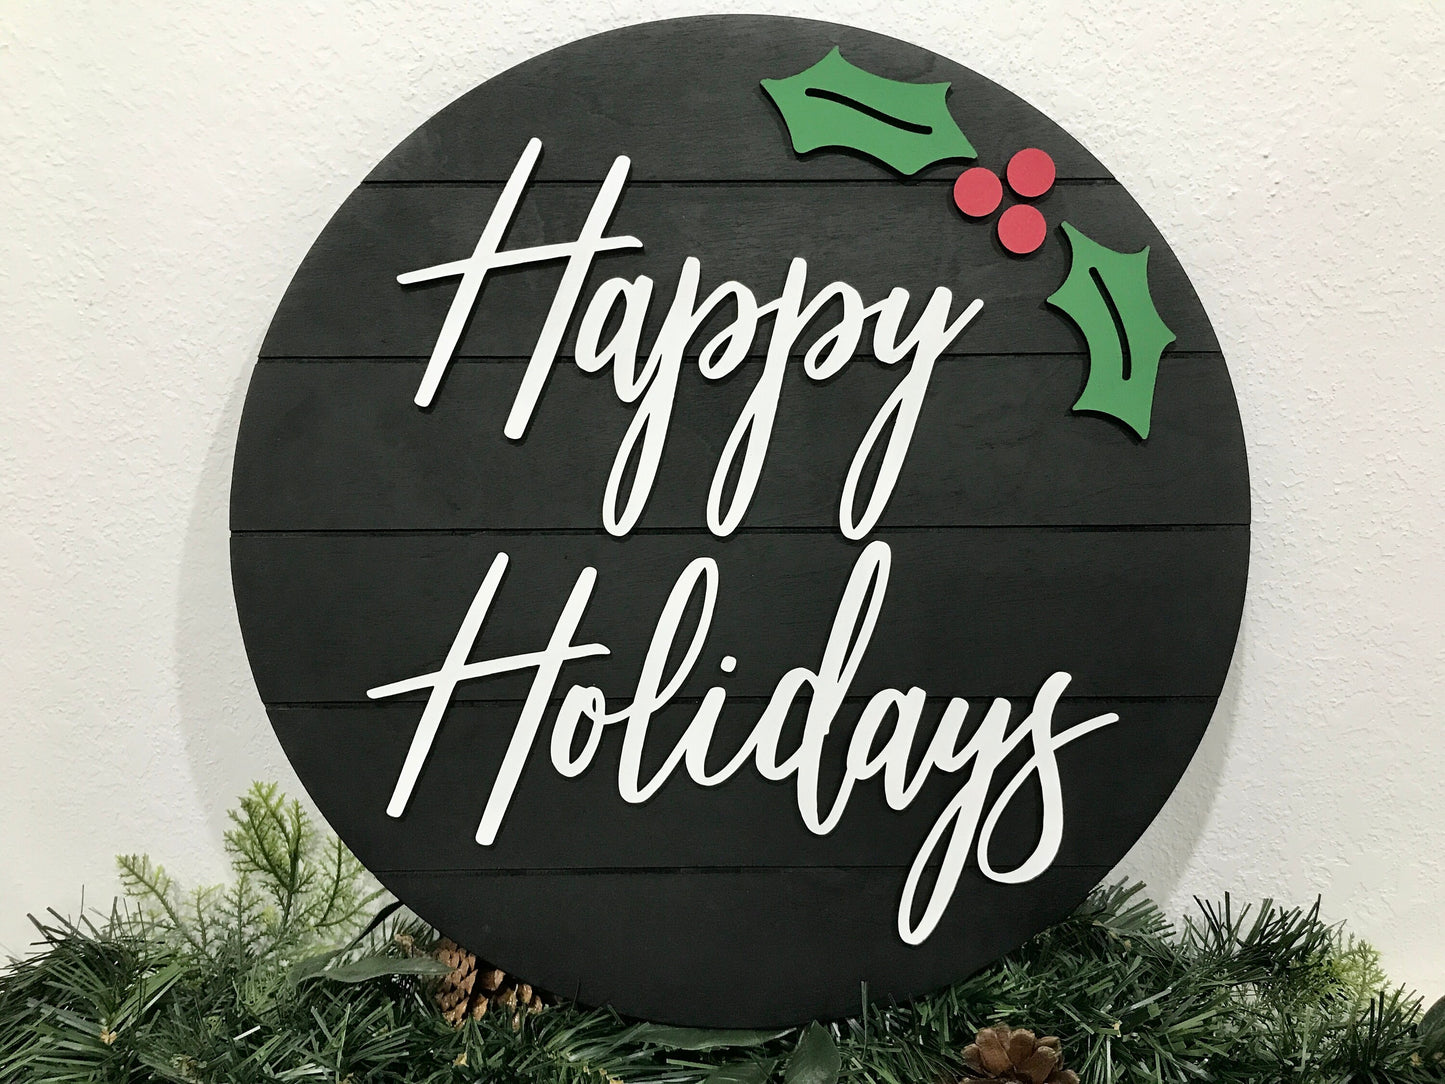 Happy holidays sign, Christmas decorations, 3D holiday decor, shiplap wood signs, living room wooden sign wall hanging, black mantel decor